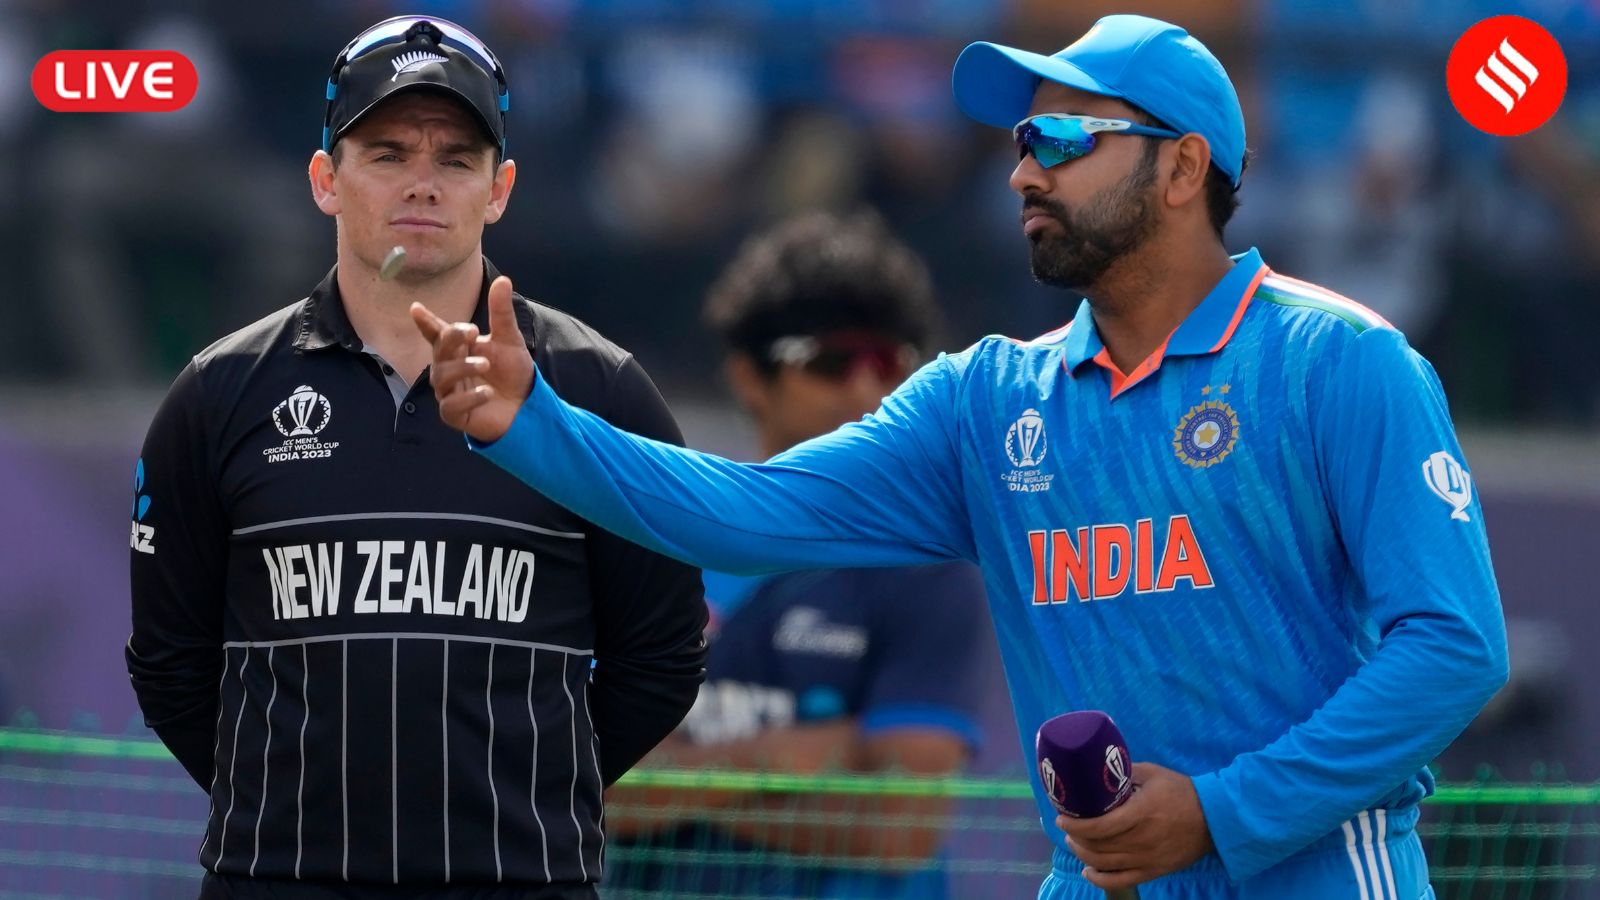 India vs New Zealand Live Score, World Cup 2023: Mohammed Shami with the breakthrough, sends Ravindra back, NZ lose 3rd | Cricket News